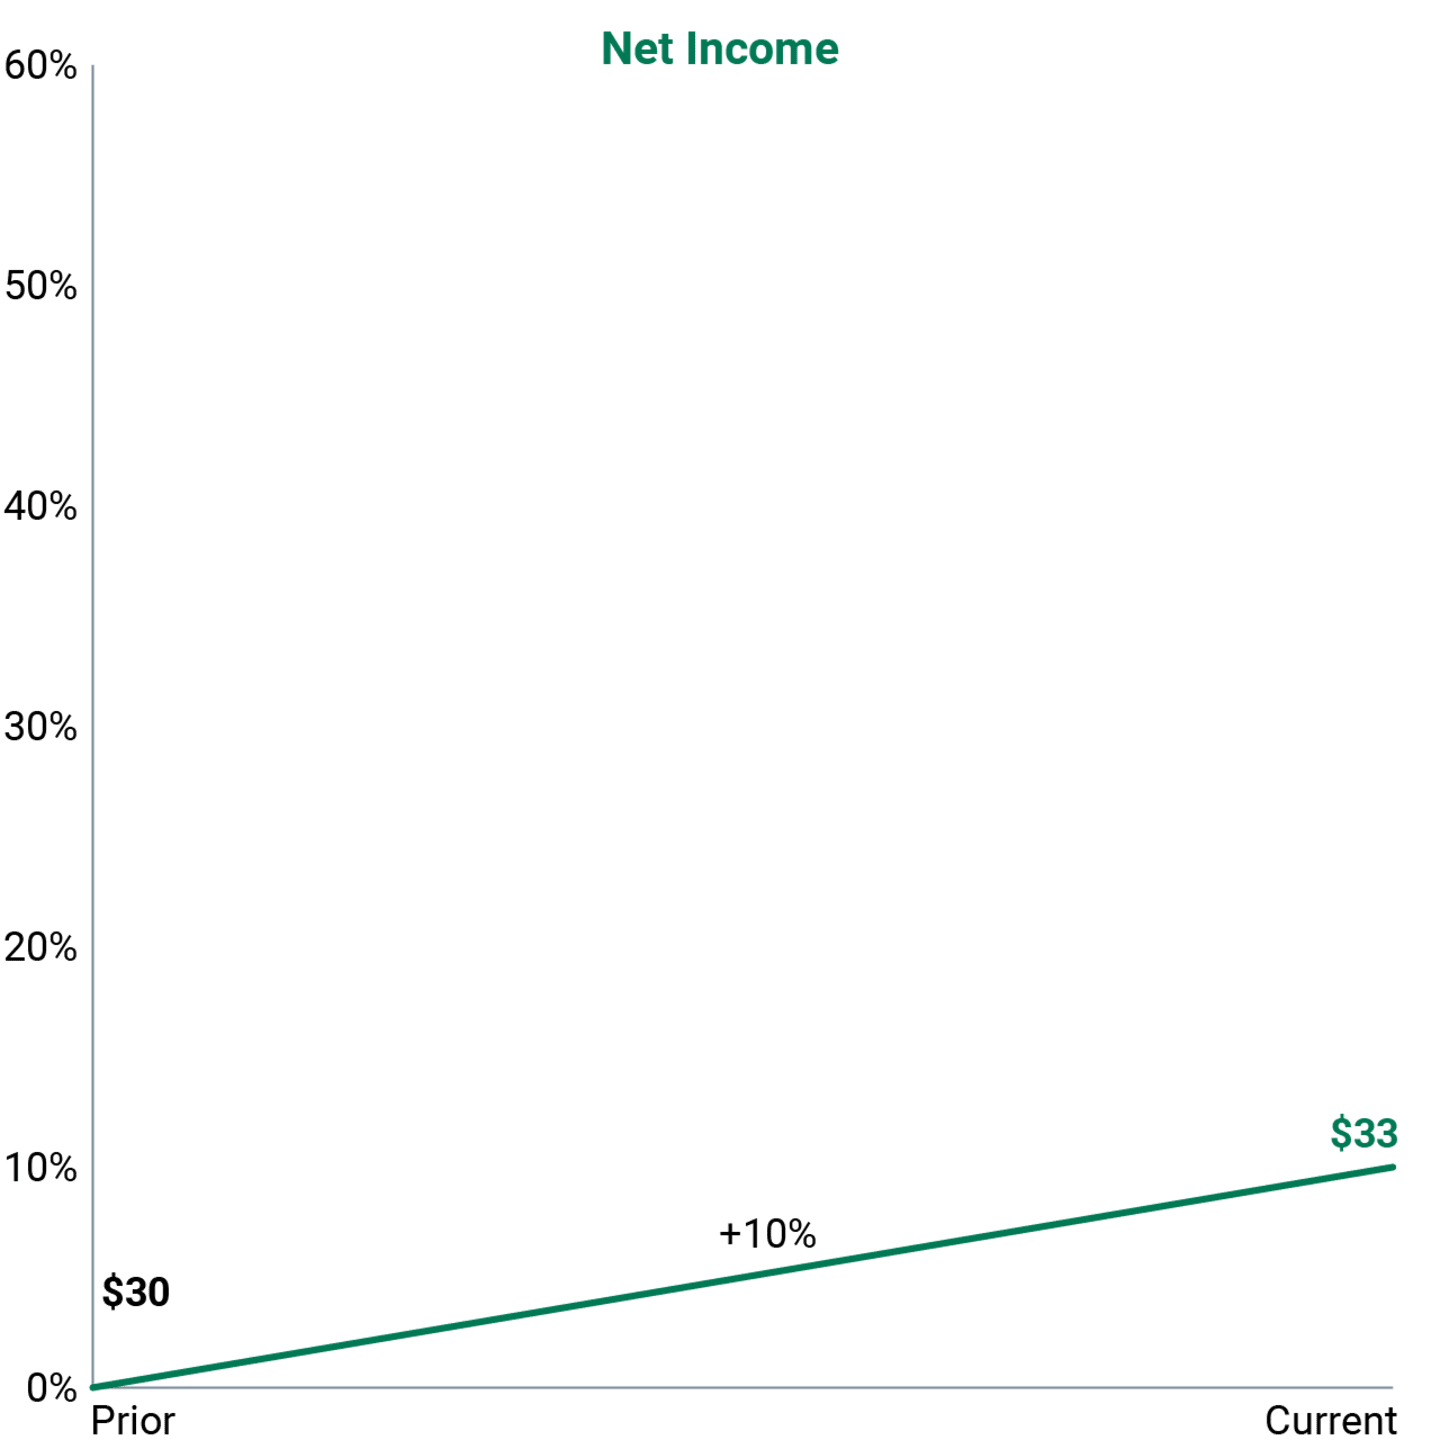 Hypothetical impact of 10% inflation on net income for typical technology company.